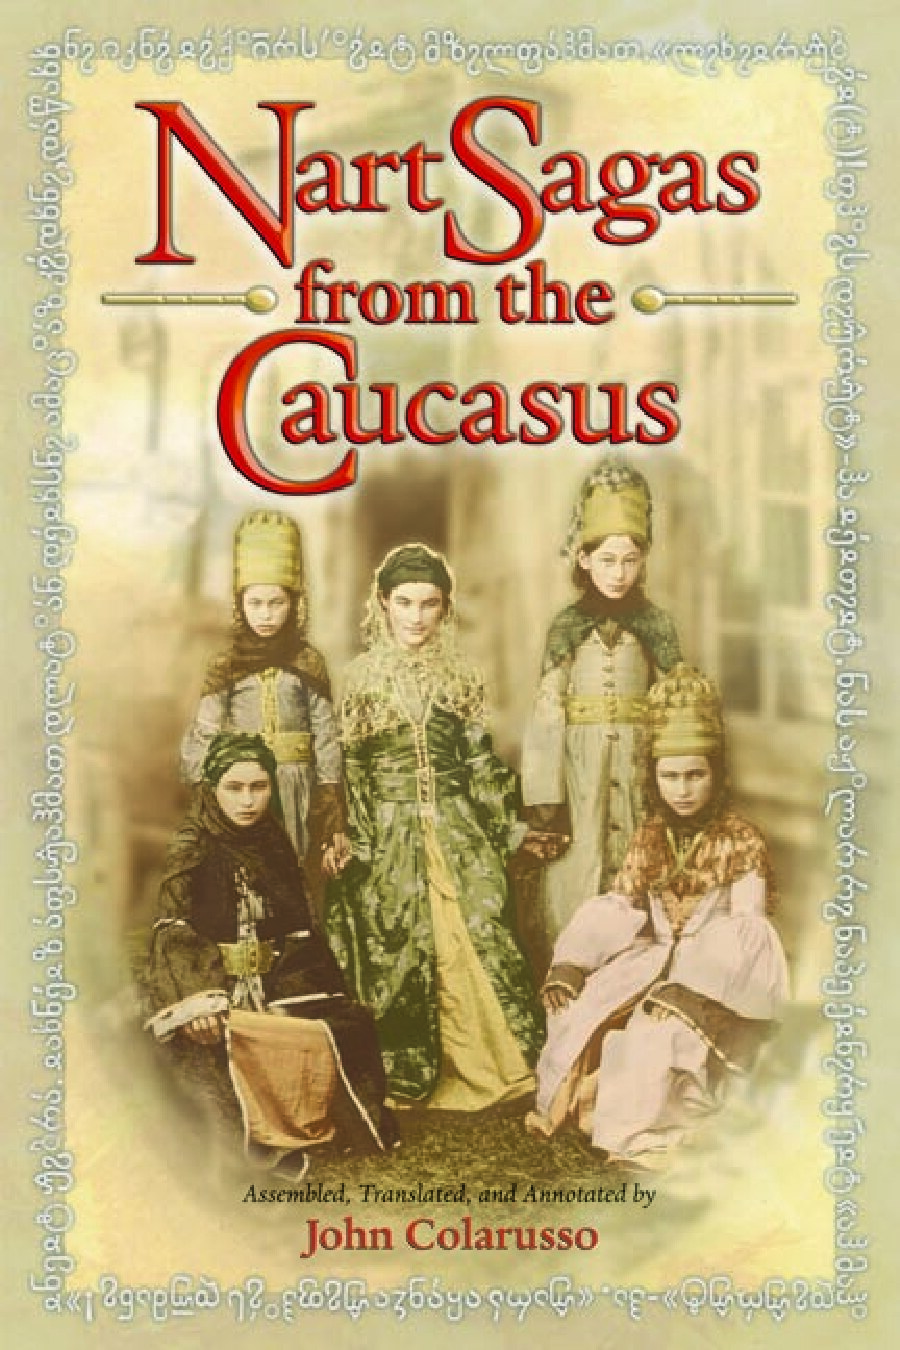 Nart Sagas from the Caucasus : Myths and Legends from the Circassians, Abazas, Abkhaz, and Ubykhs